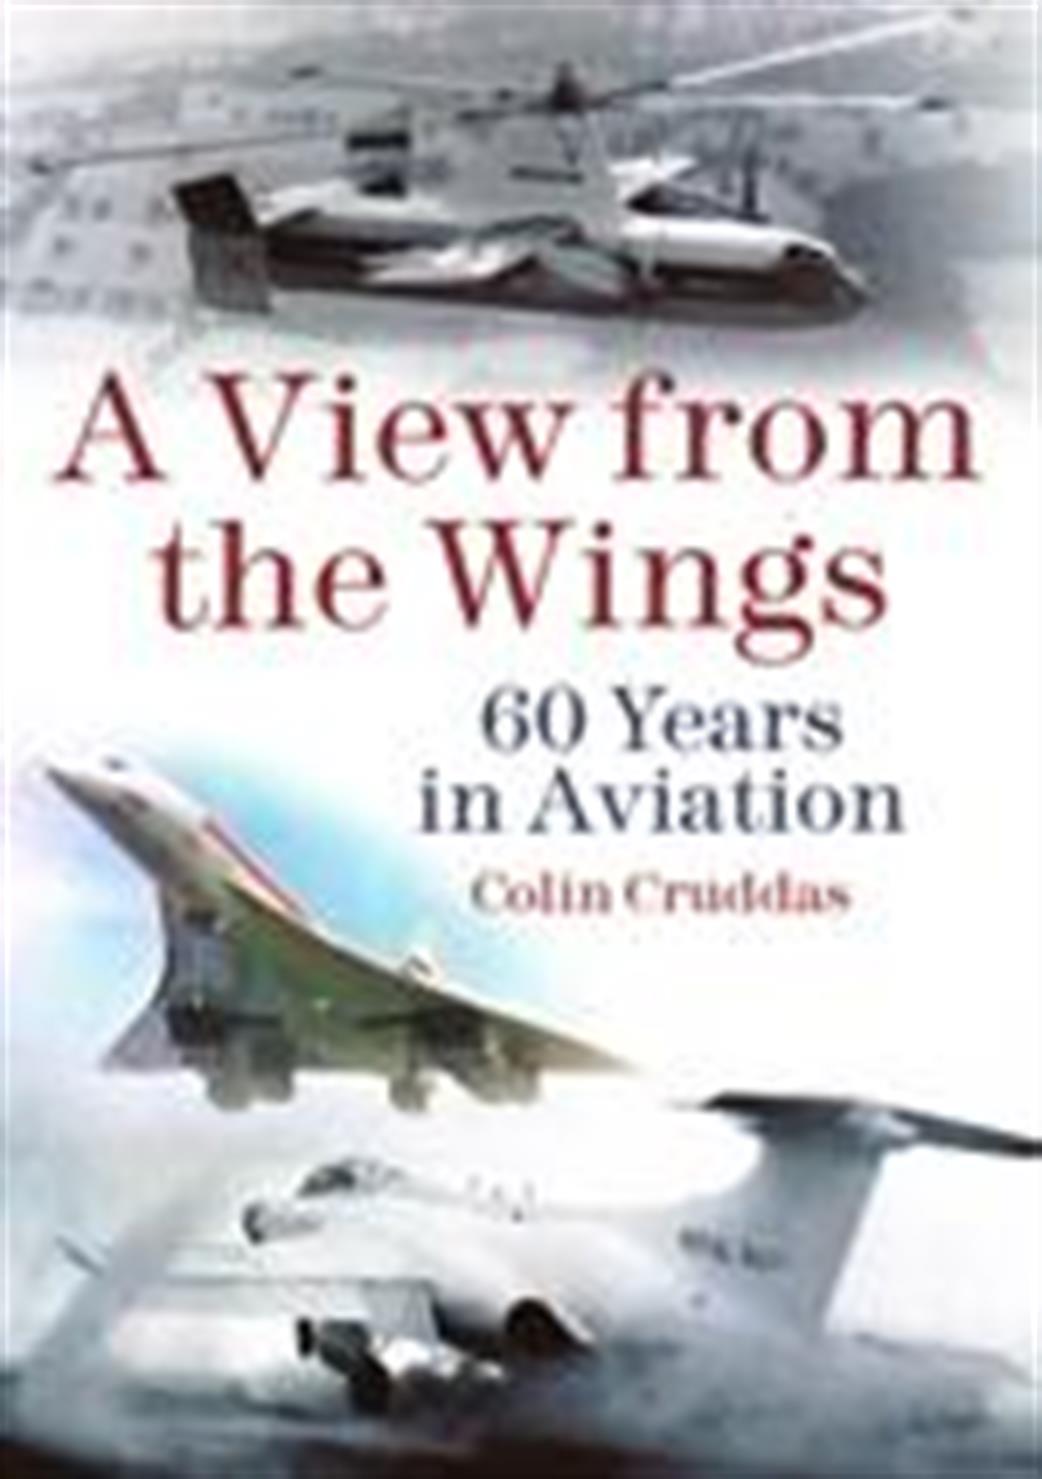 9780752477480 A View From The Wings by Colin Cruddas